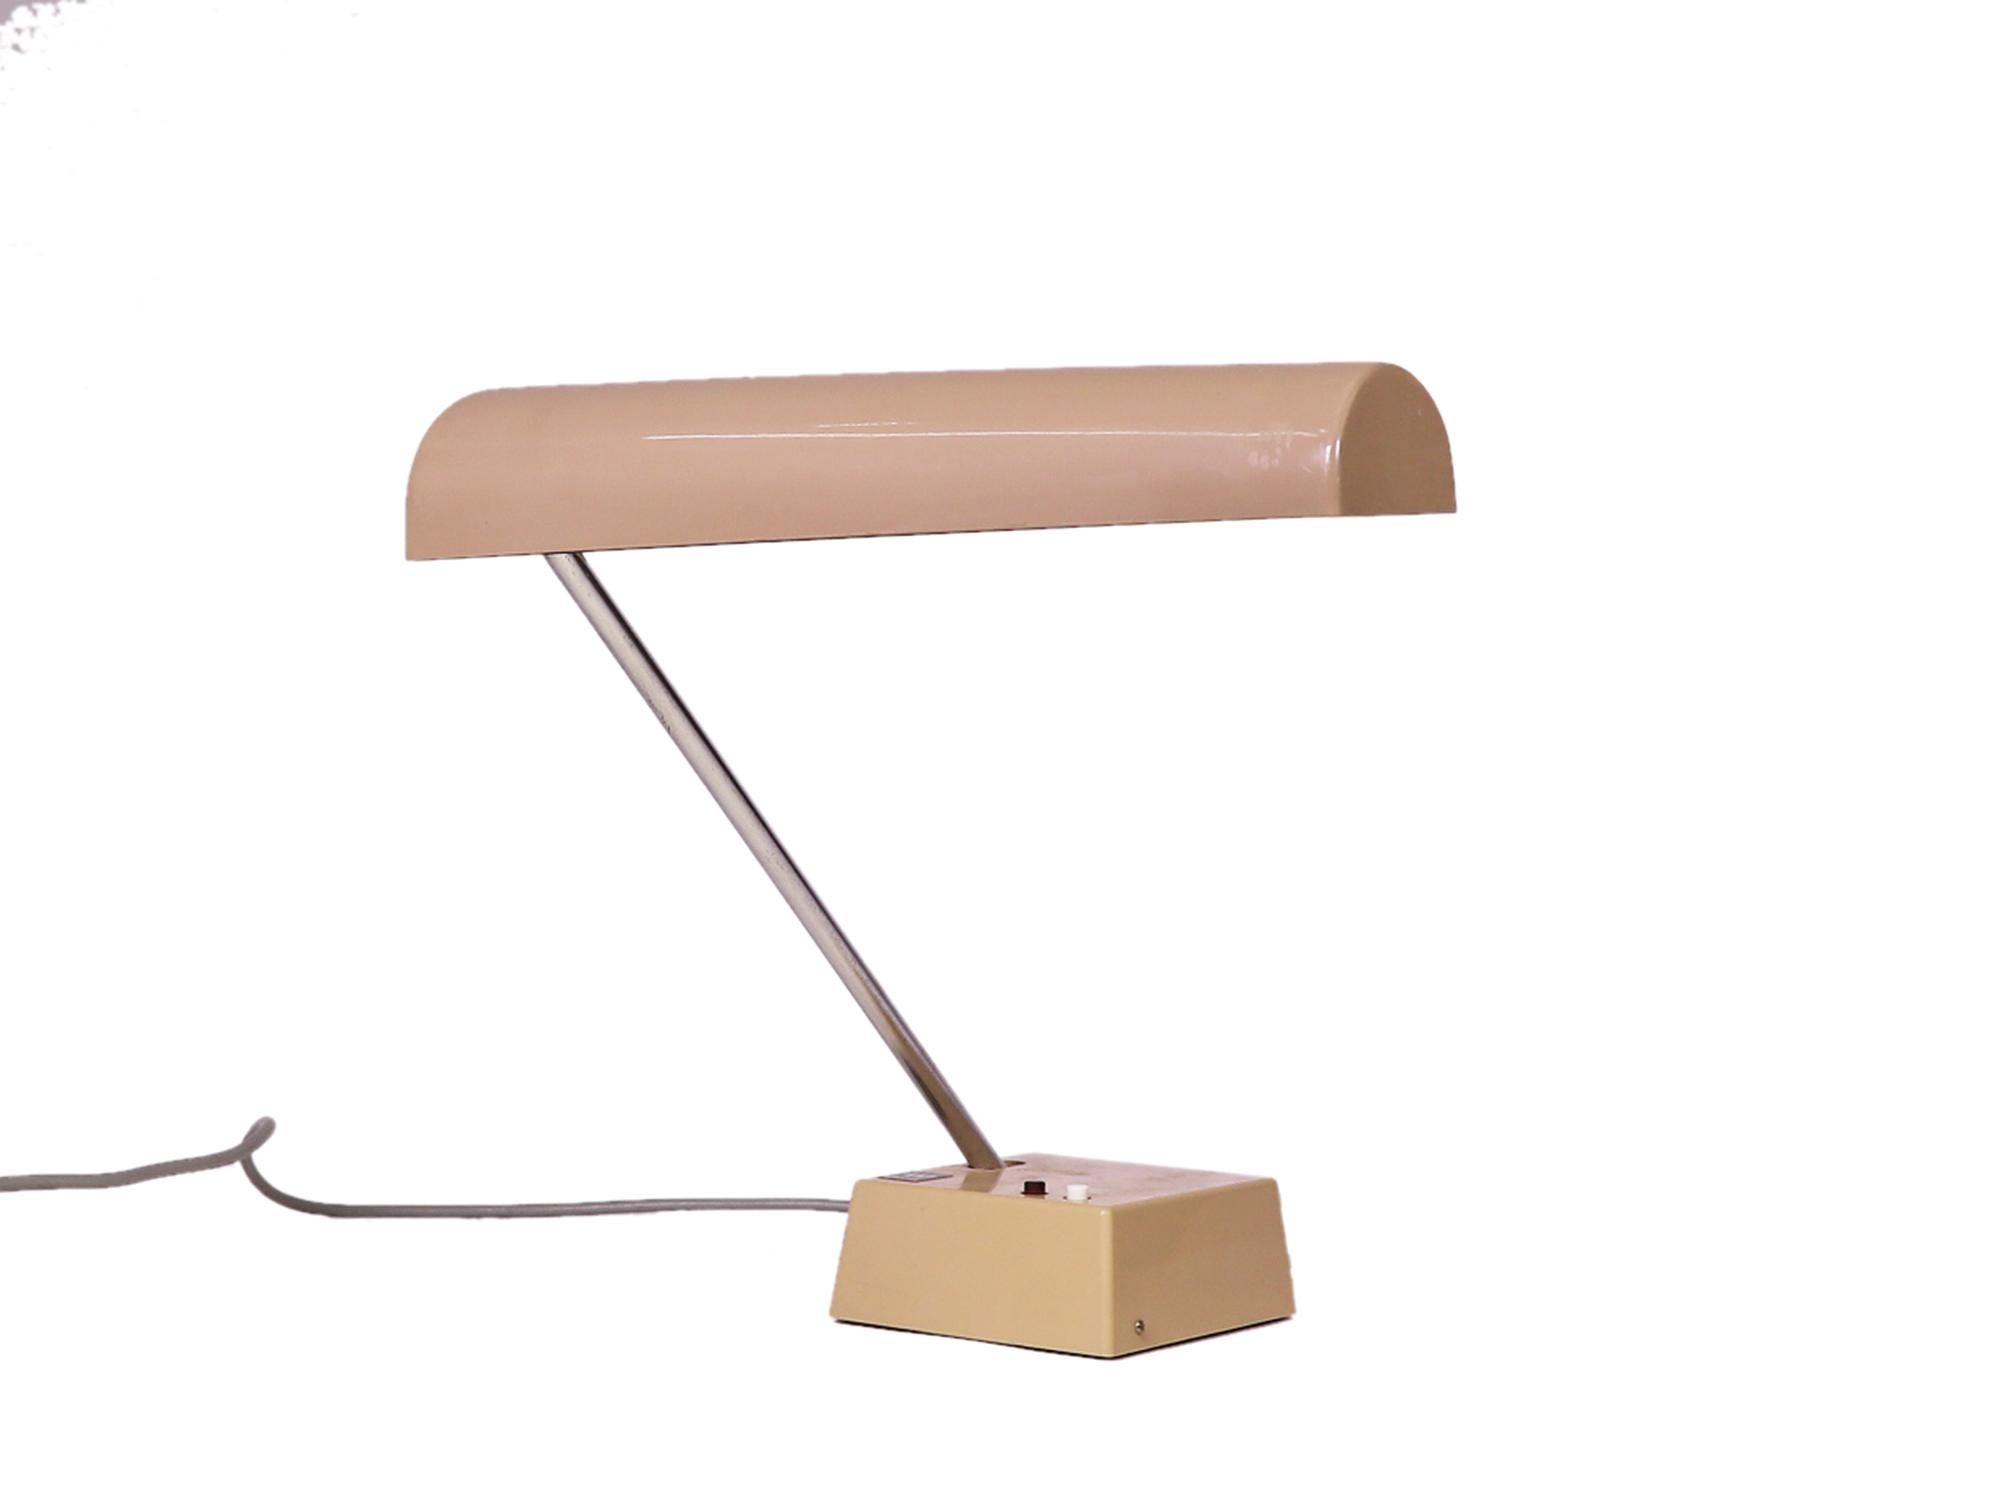 Adjustable desk lamp 'Odette' Type TL 218 designed by Bauhaus member Wolfgang Tuempel and produced by Waldmann Leuchten, Germany in the 1960s. 

Wolfgang Tuempel (1903-1978) was a Bauhaus designer. His work is represented in the collection of the